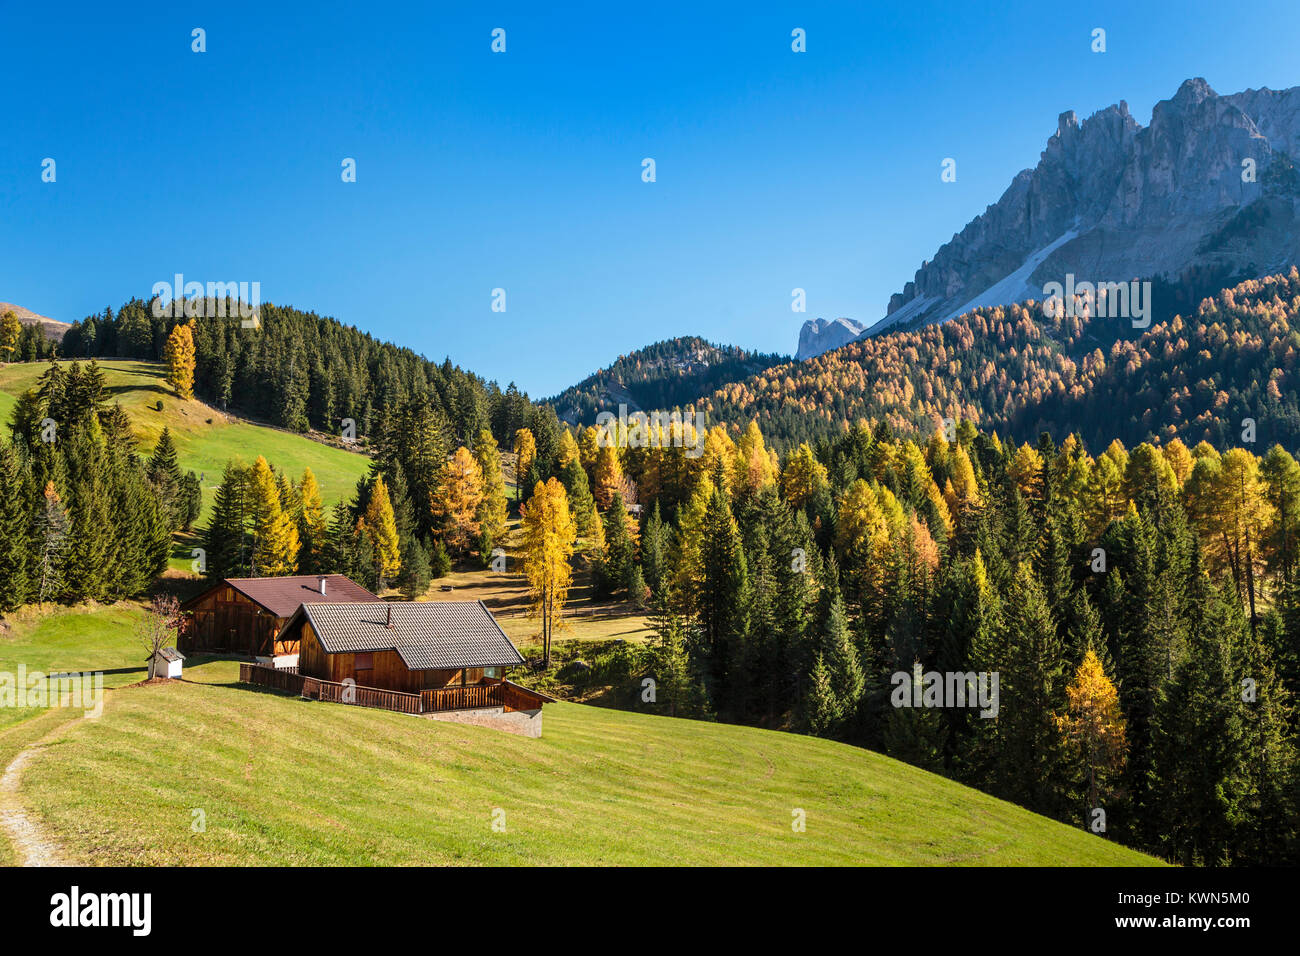 The Dolomite moutain range with fall foliage color near San Pietro, Val di Funes, South Tyrol, Italy, Europe. Stock Photo